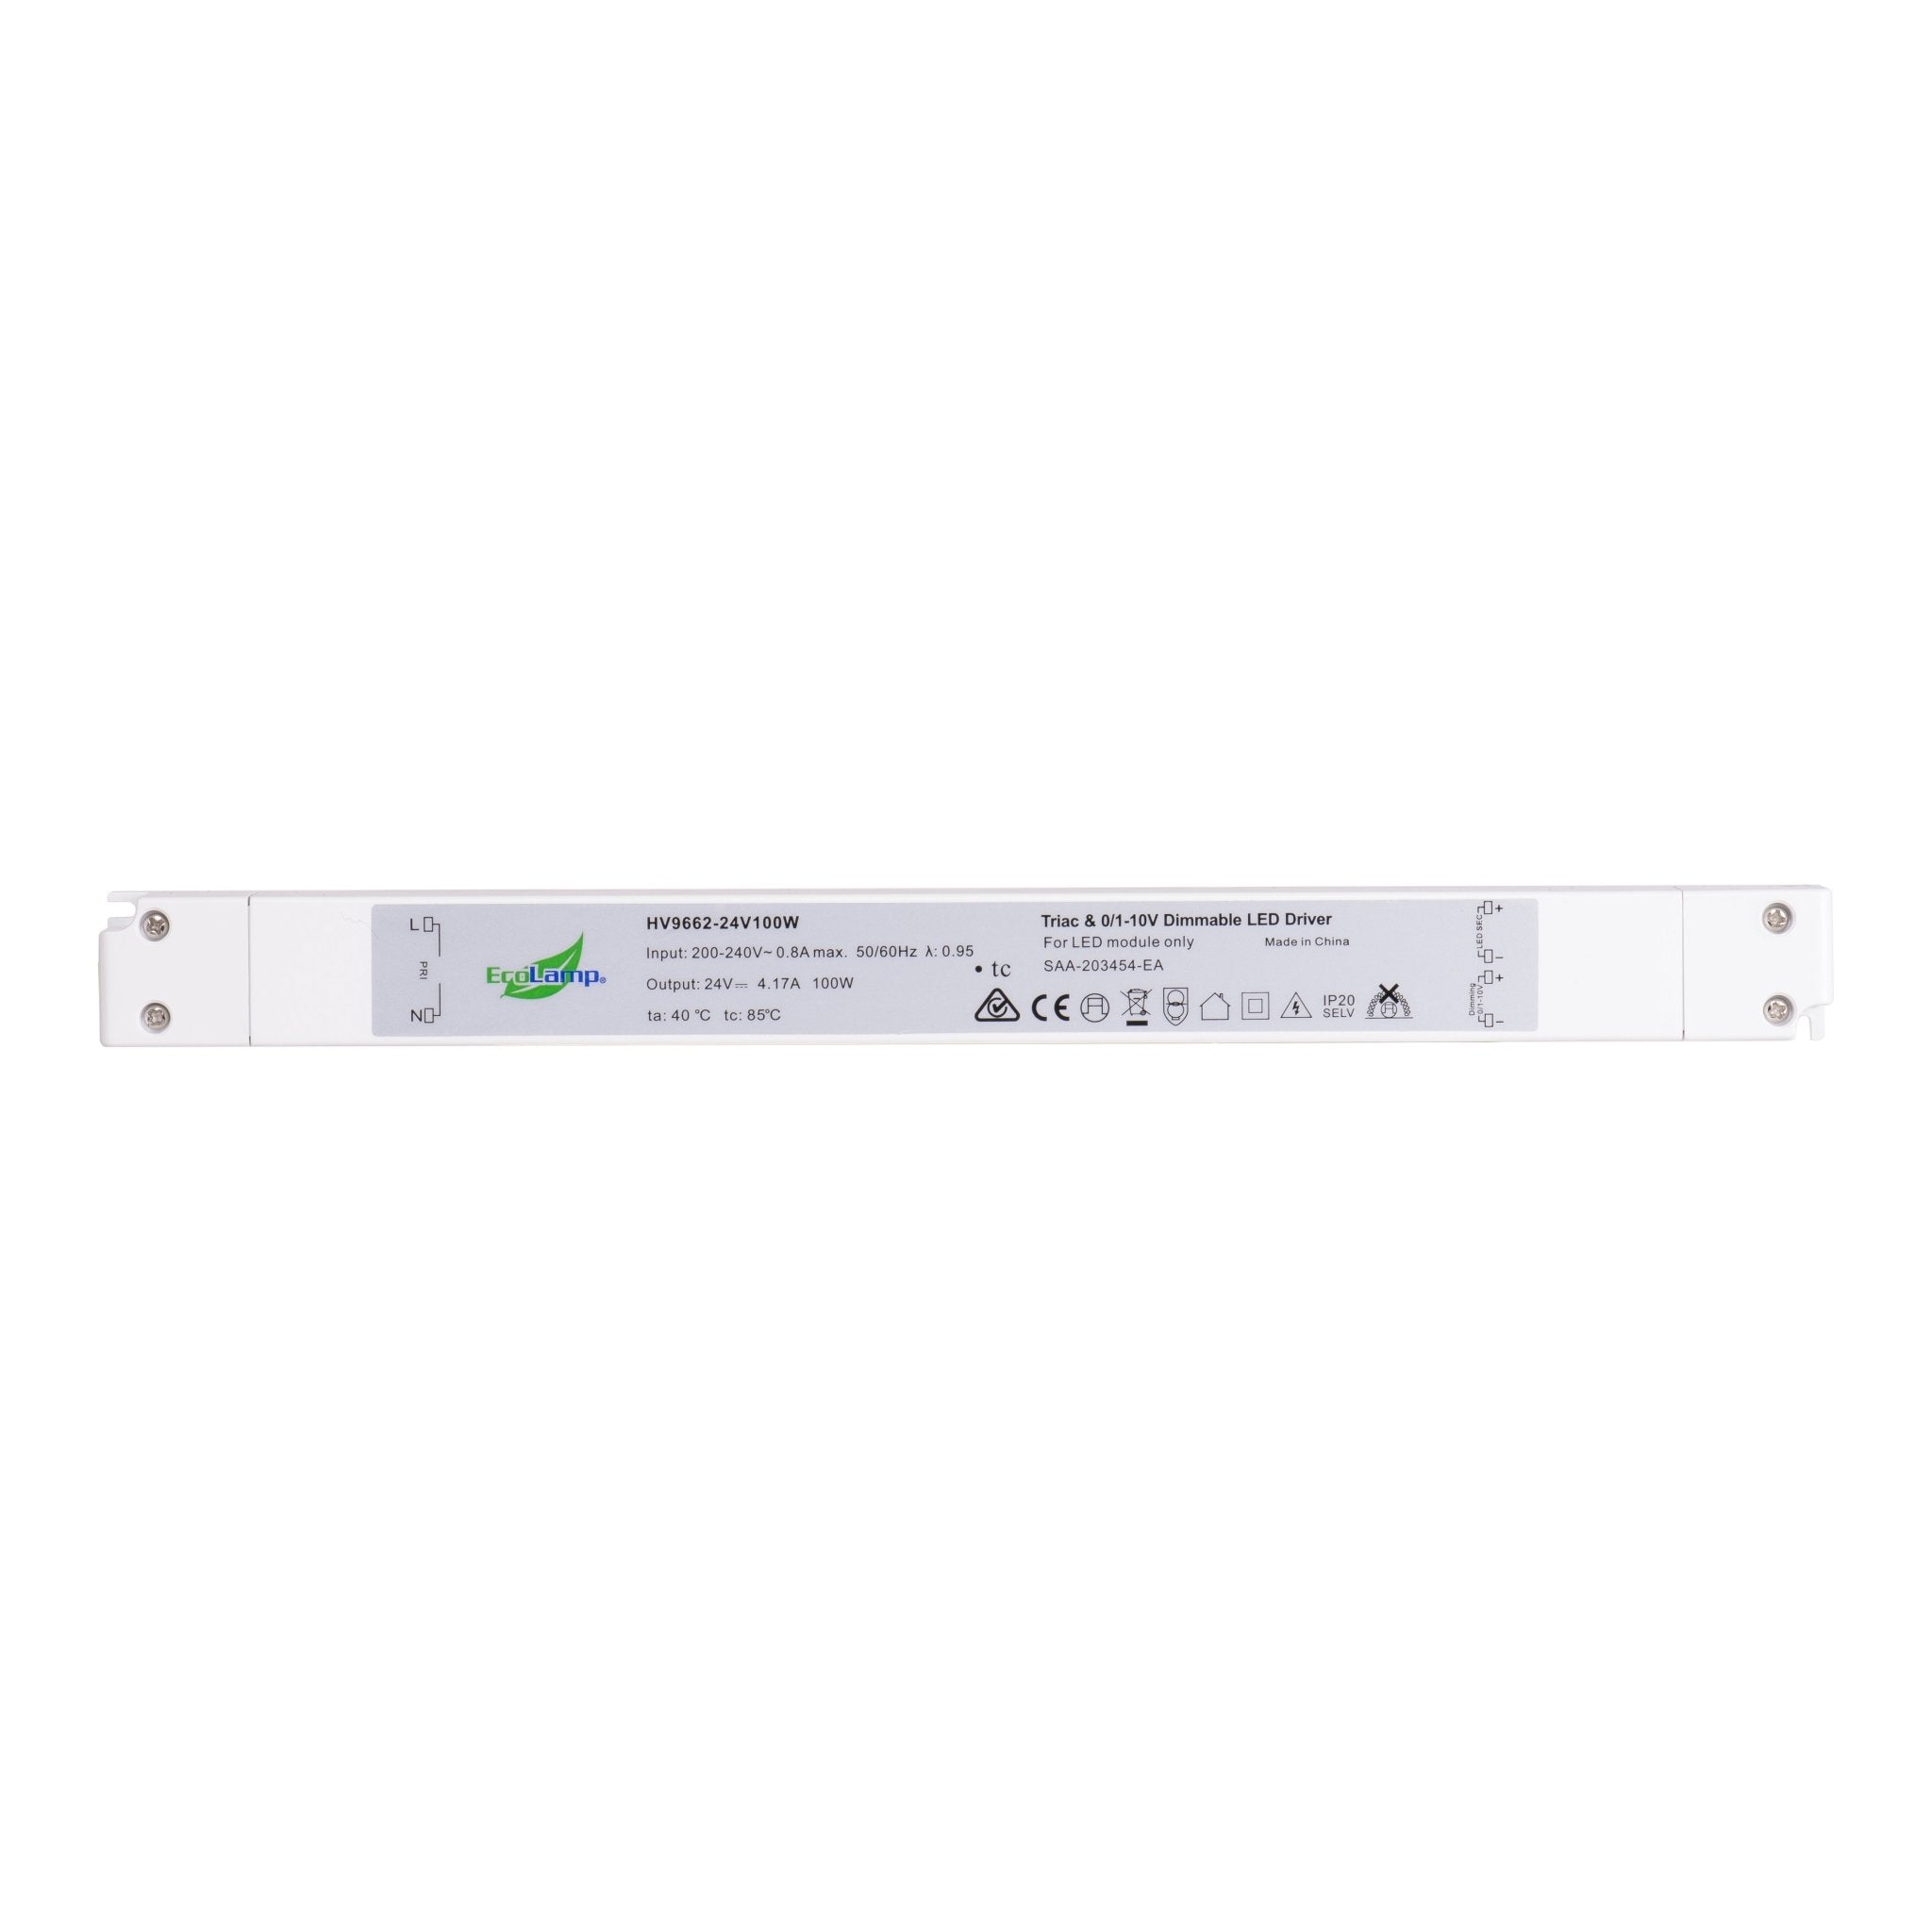 HV9662-100W IP20 Triac + 0-1/10v 2 in 1 Dimmable LED Driver